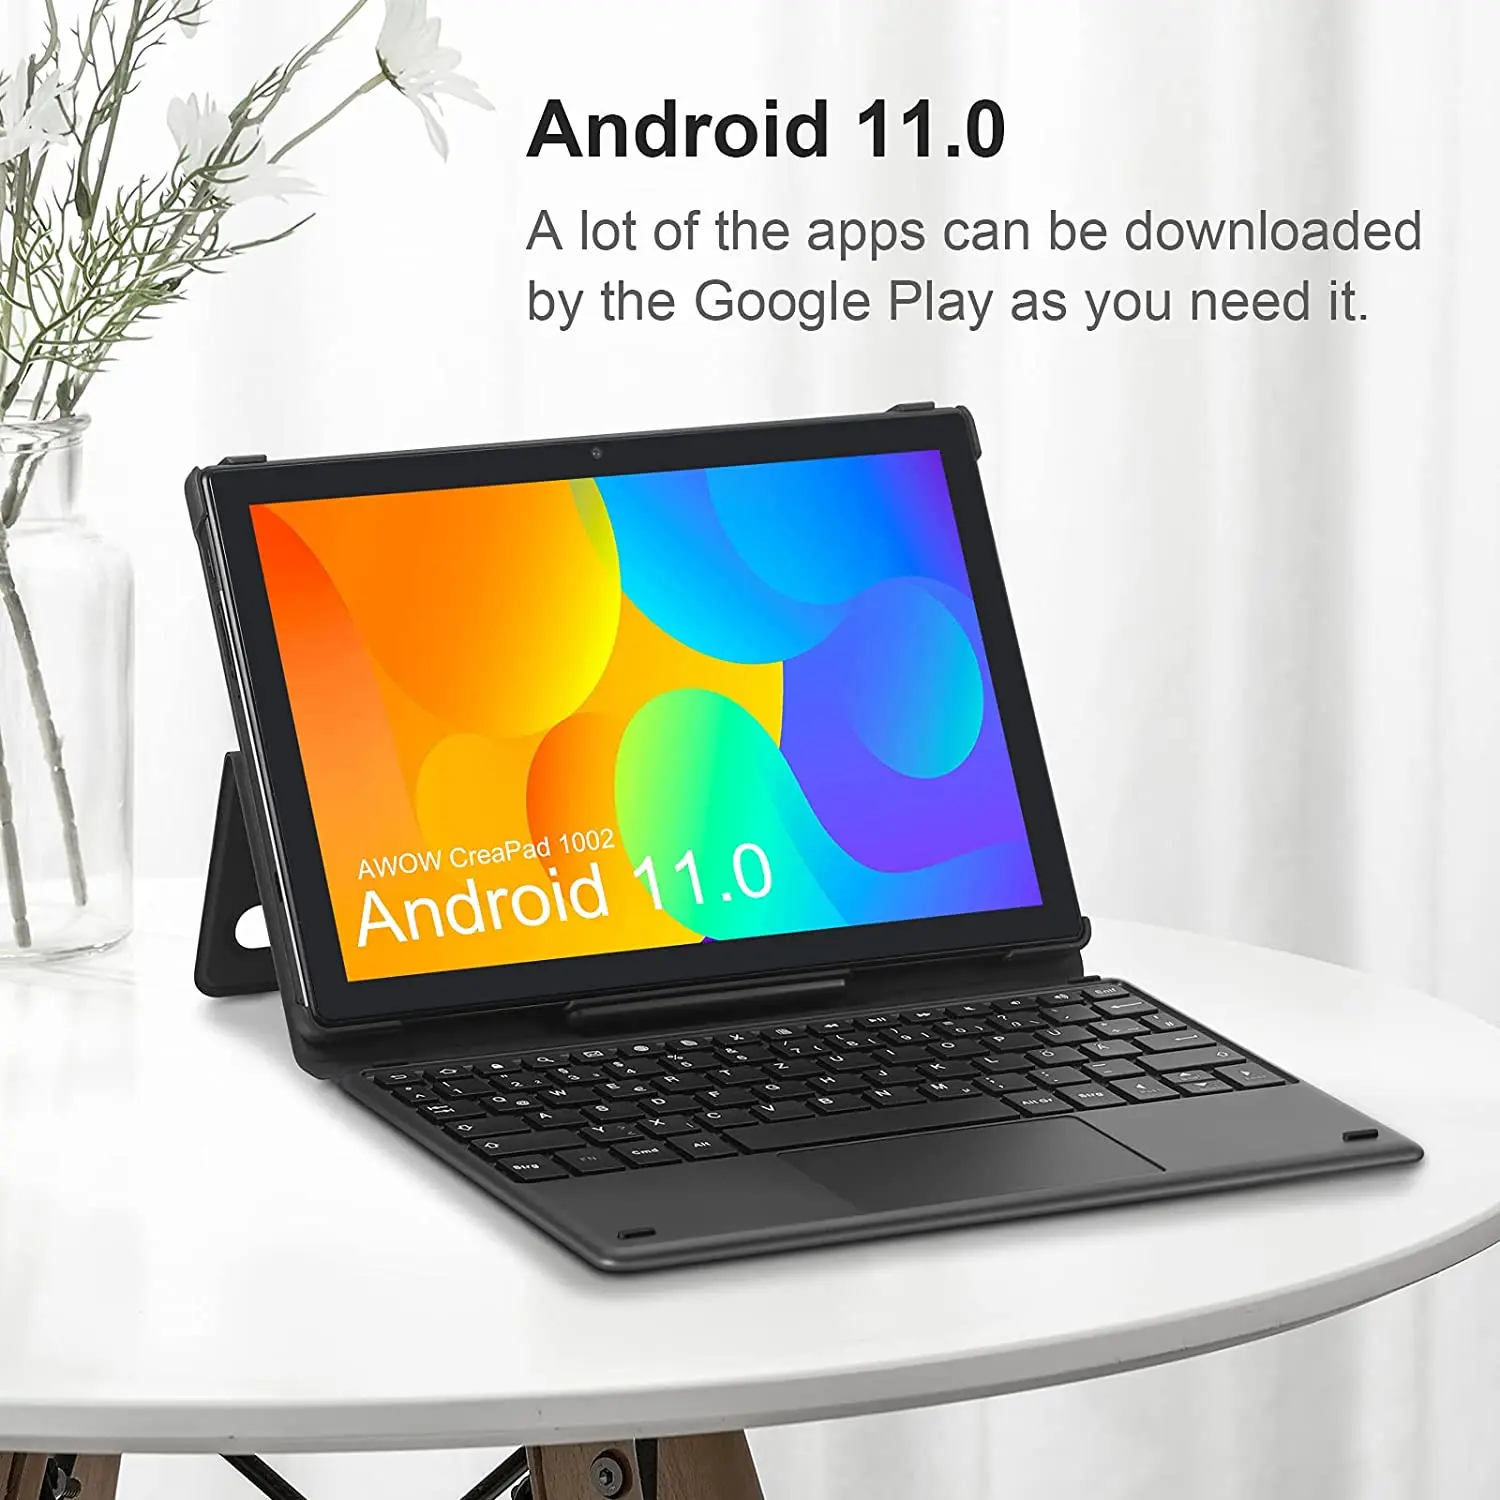 Image of our octa core tablet showcasing the android version 